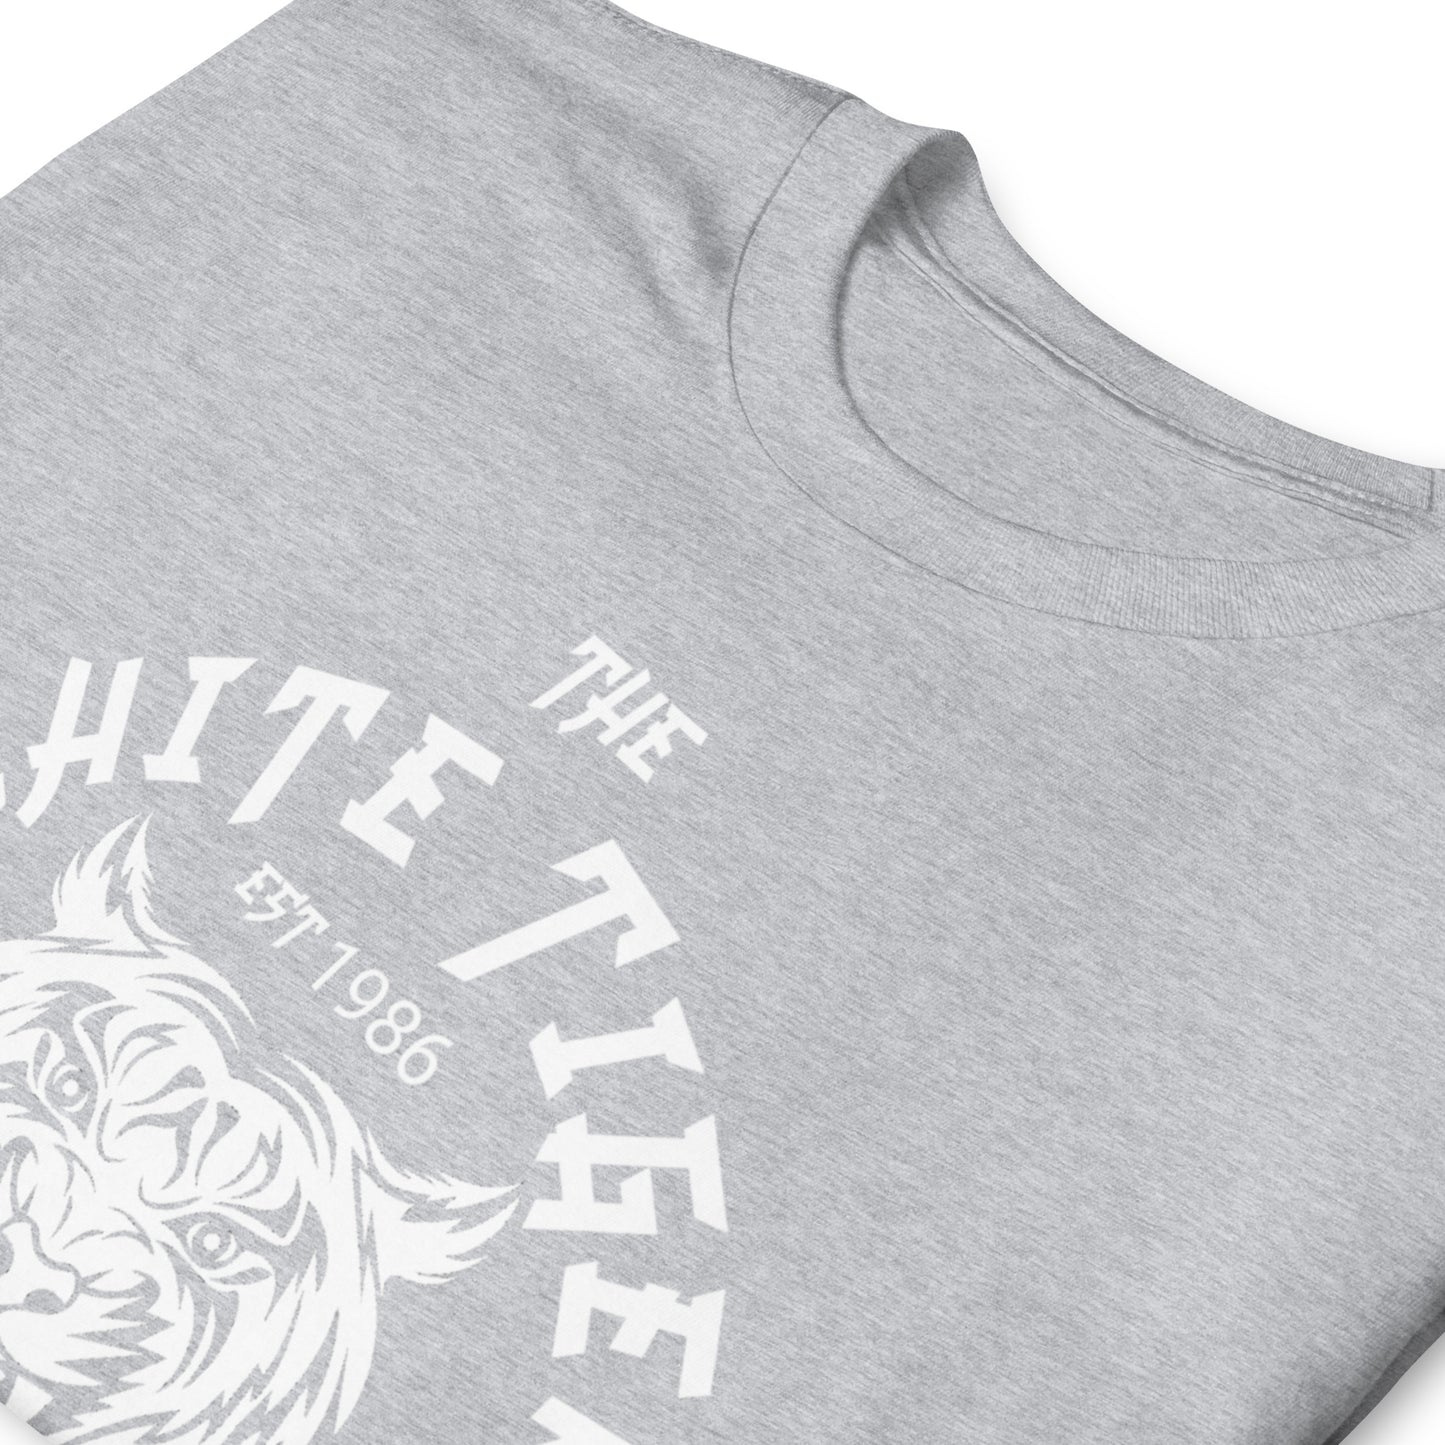 Big trouble in Little China, The White Tiger Unisex T-Shirt